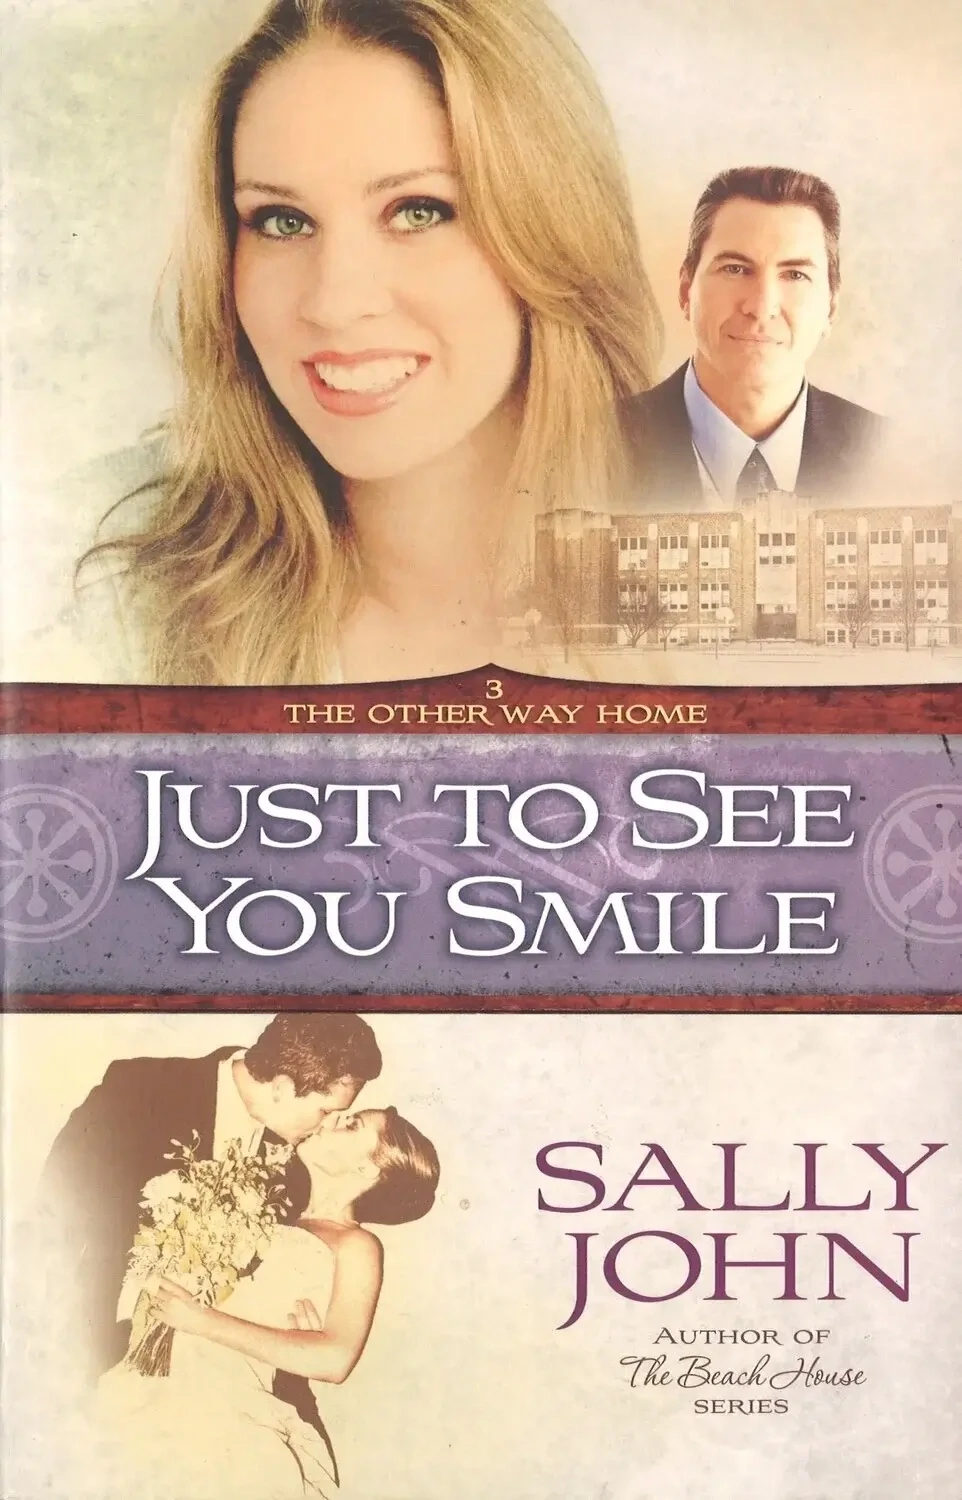 Just to See You Smile (Book 3, The Other Way Home)